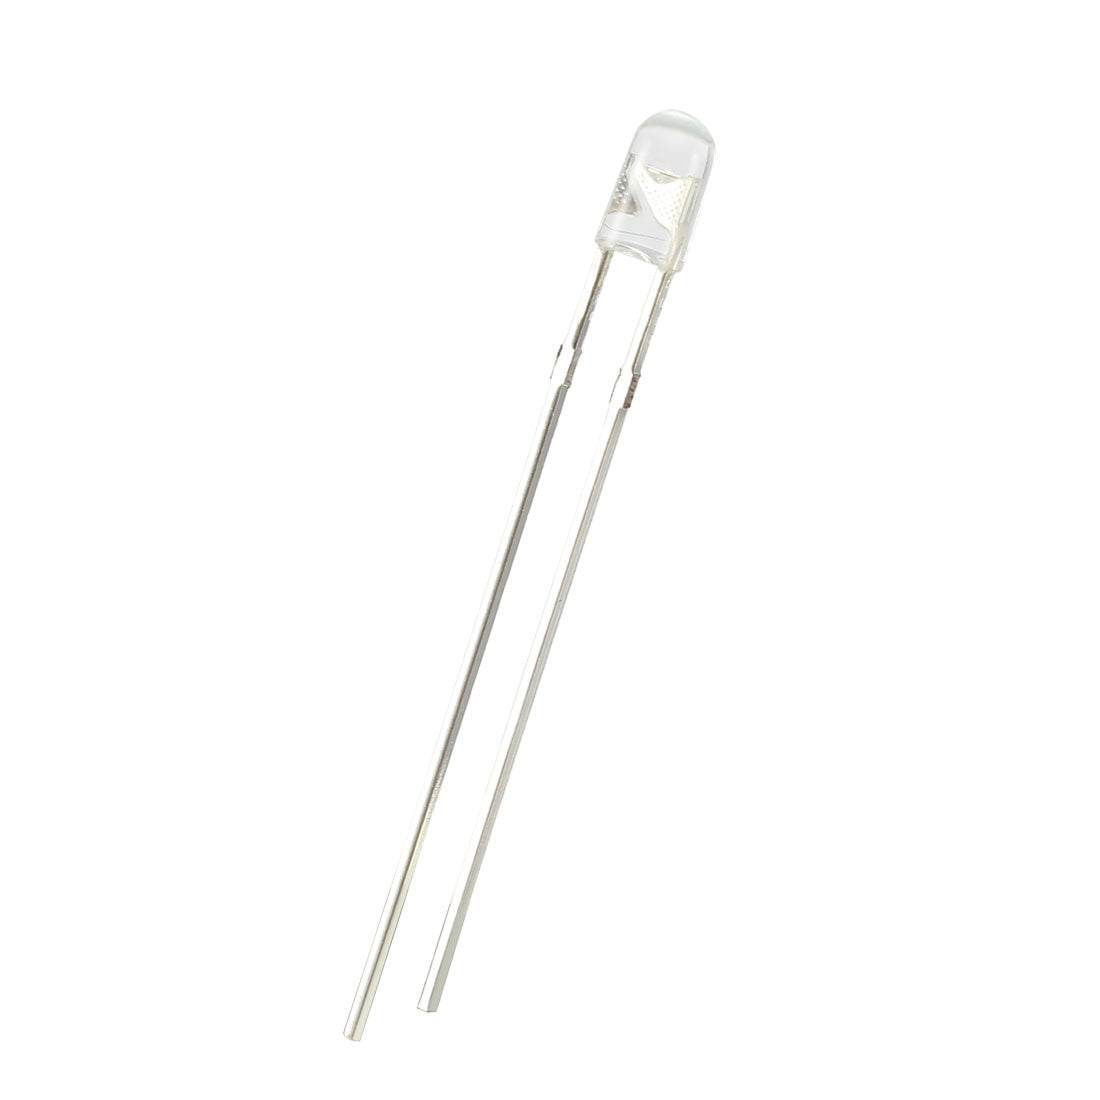 uxcell Uxcell 50pcs 3mm 850nm Infrared Emitter Diode DC 1.5V LED IR Emitter Clear Round Head